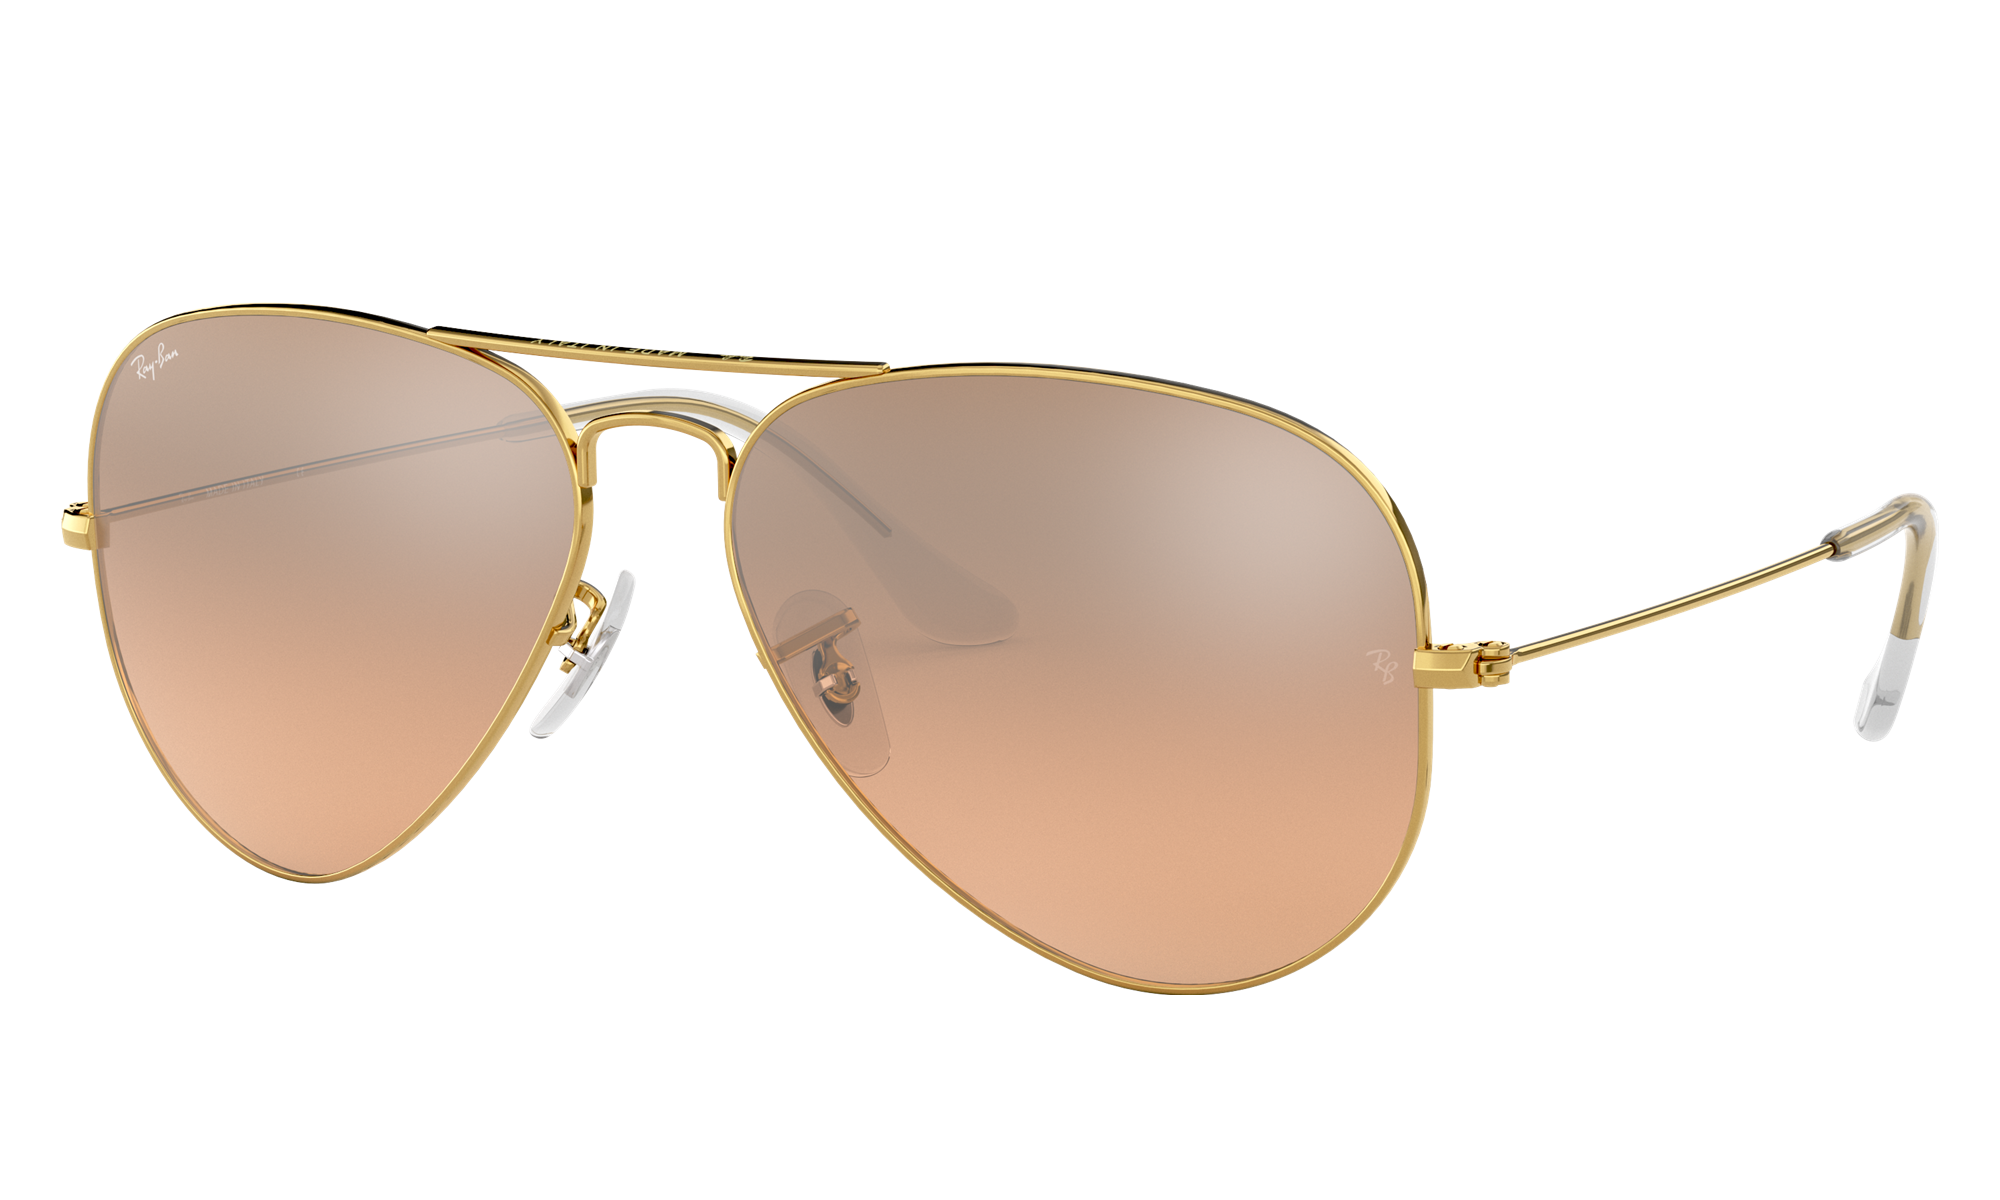 Ray-Ban Unisex Rb3025 Gold Size: Large